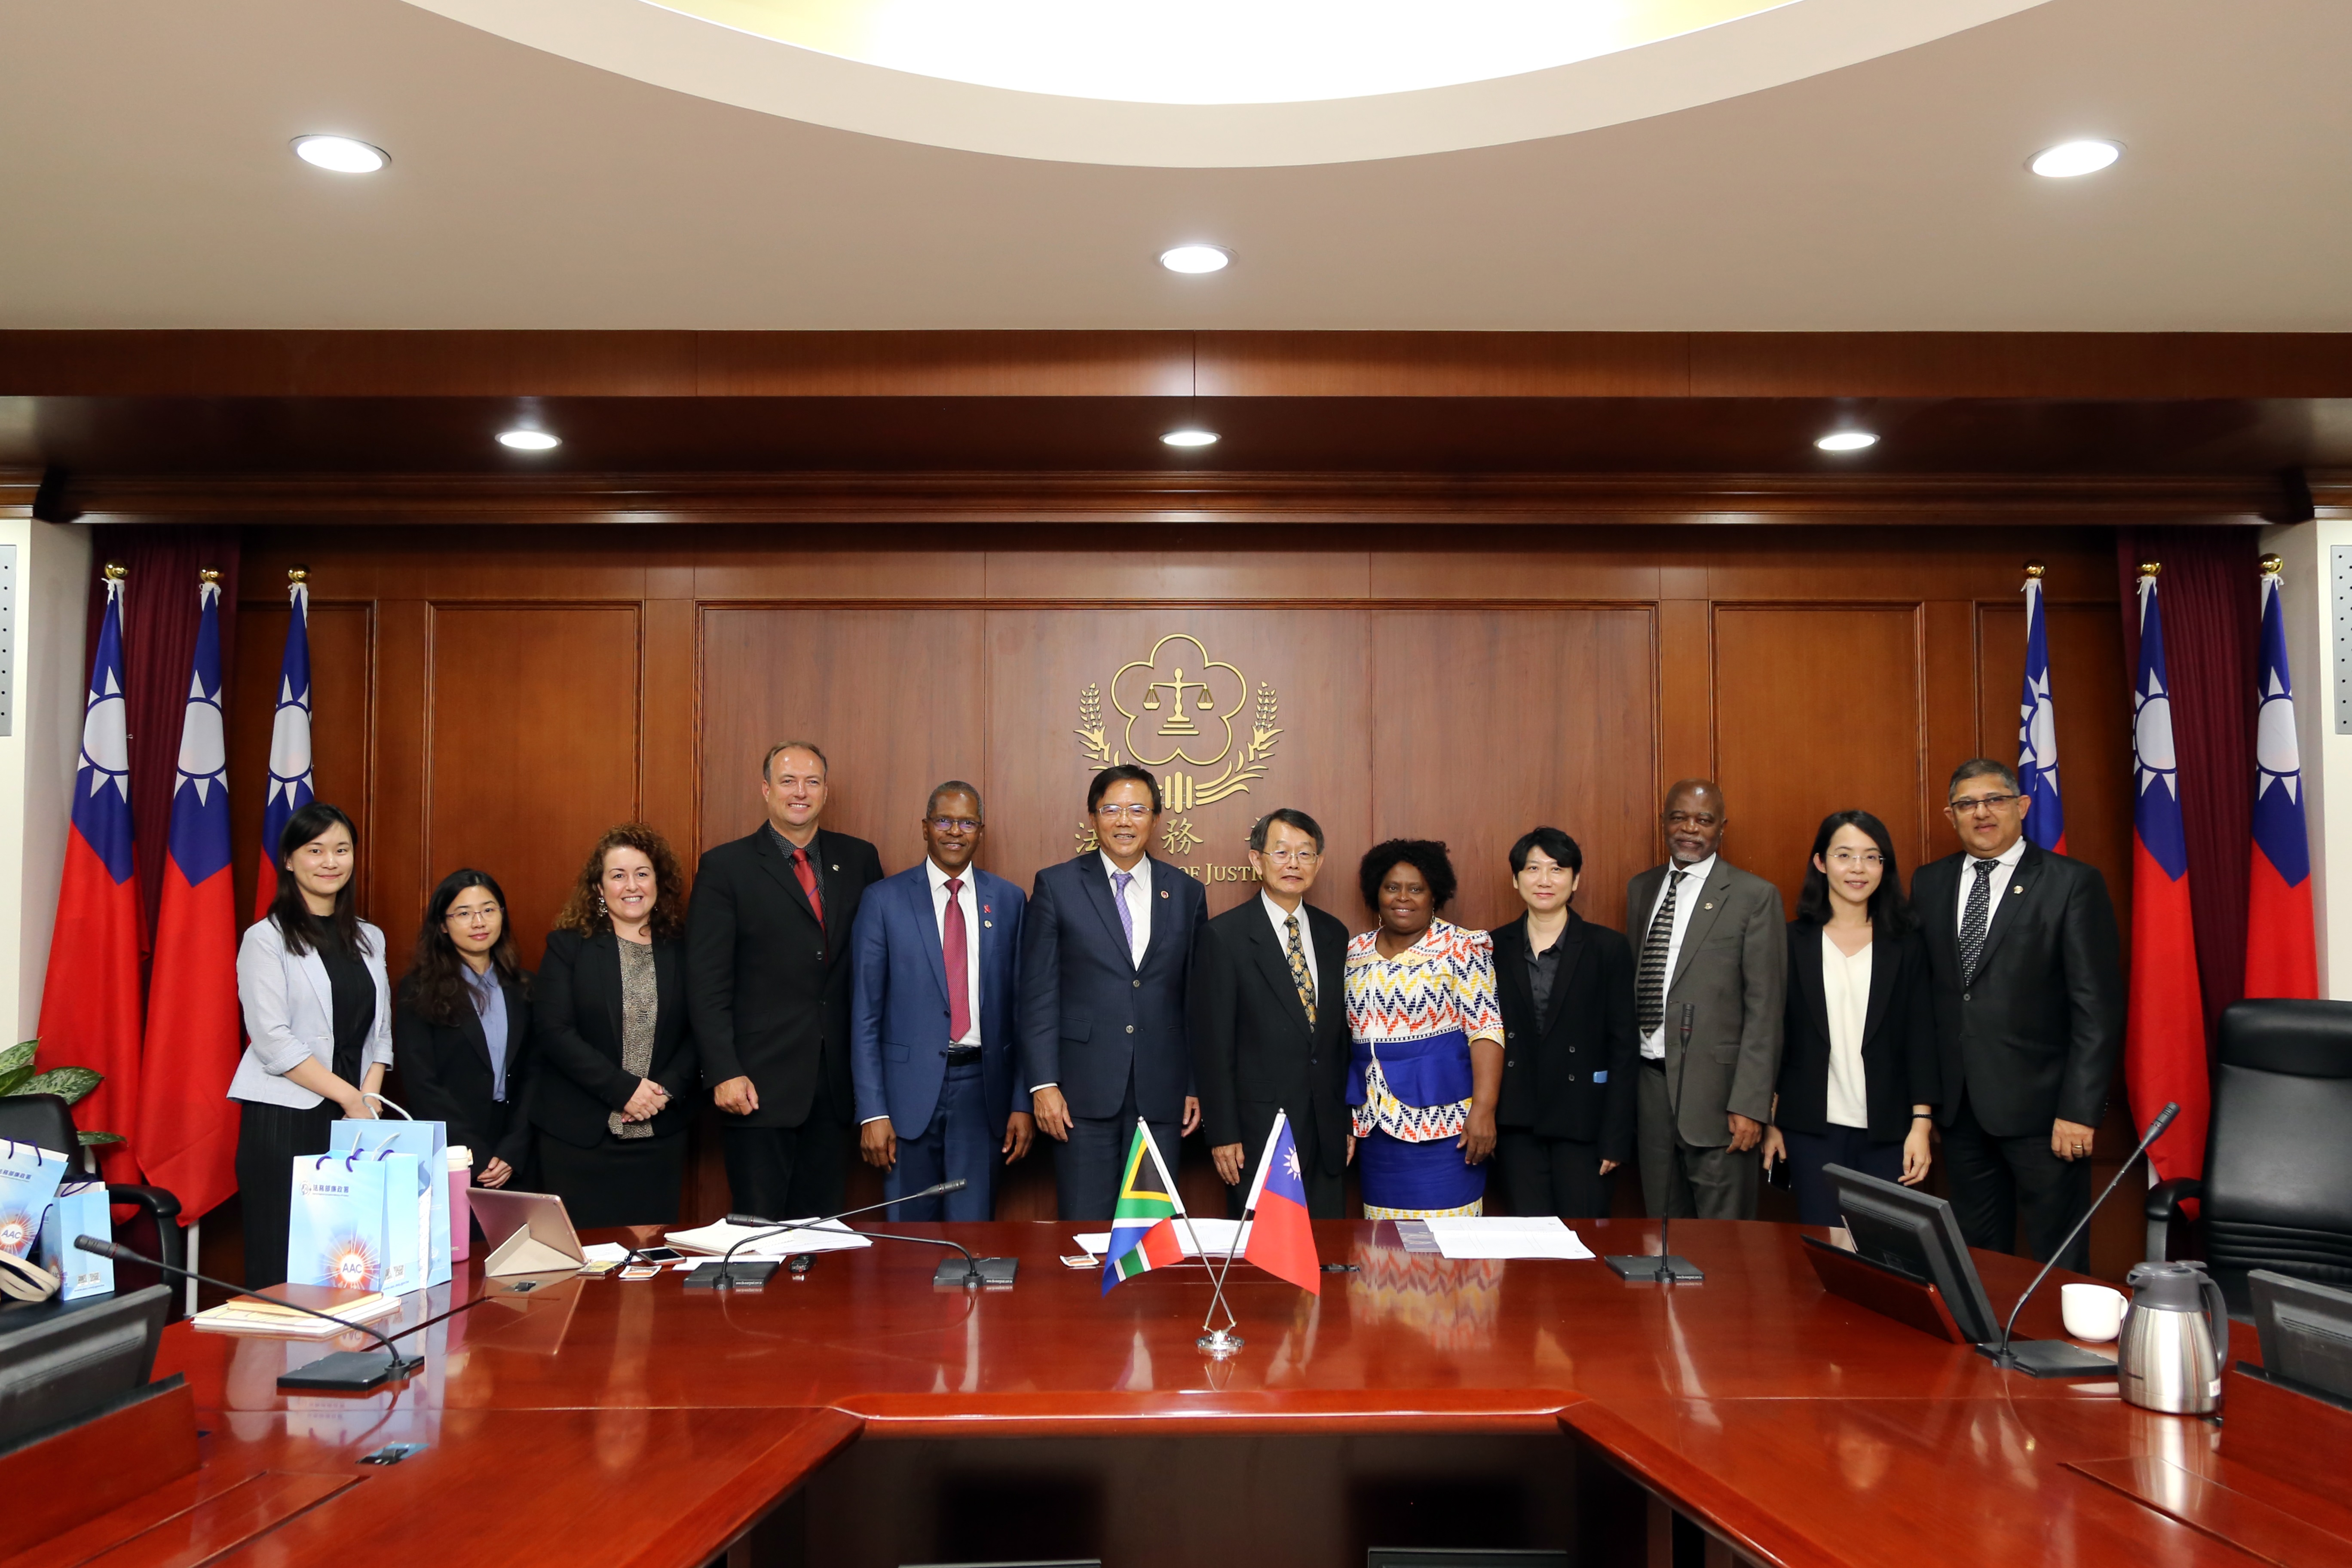 A delegation led by Hon. Velenkosini Fiki Hlabisa, the President of Inkatha Freedom Party in South Africa, visited MOJ to exchange views on anti-corruption, anti-money laundering and judicial reform on 17 Dec. 2019.